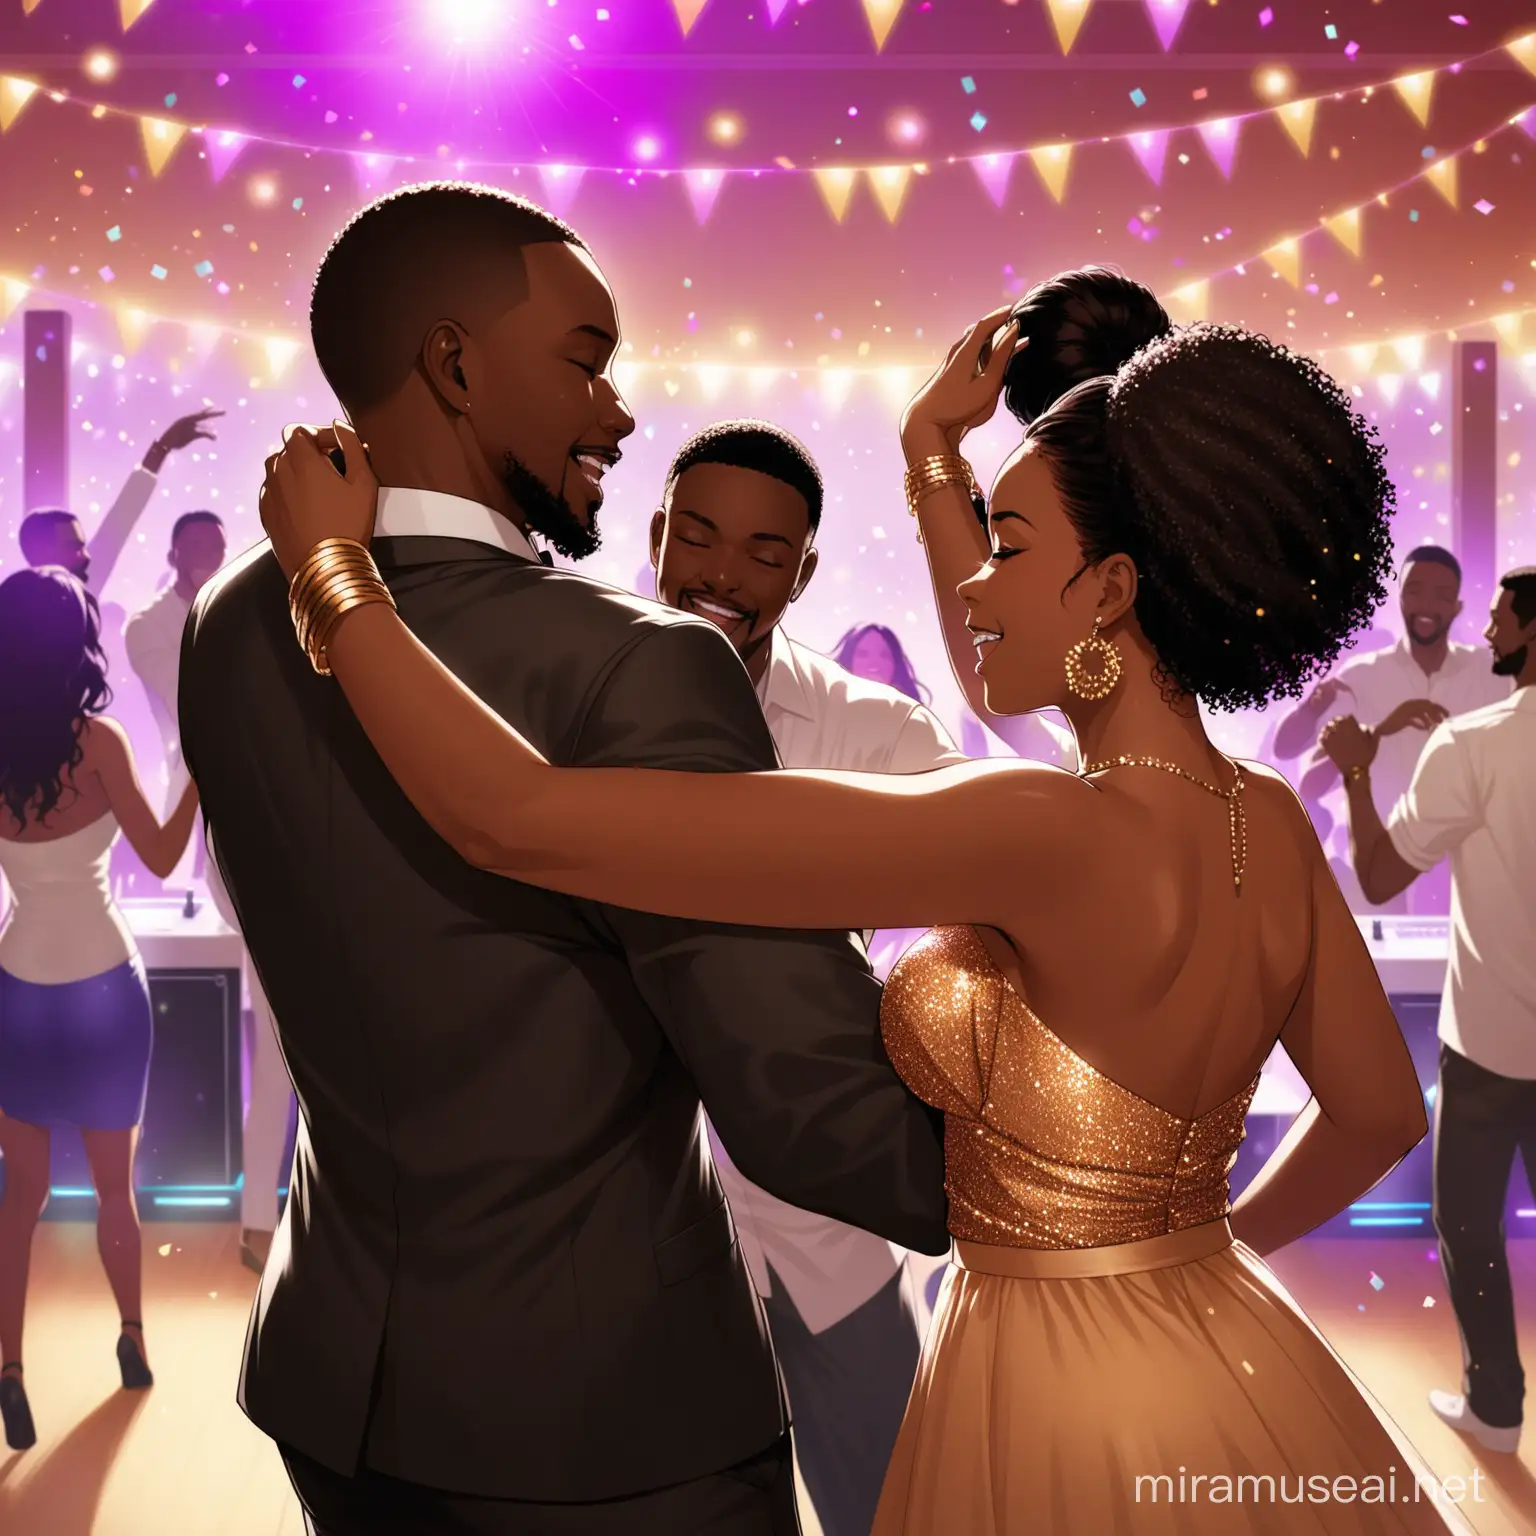 Black couple dancing at party with dj in background